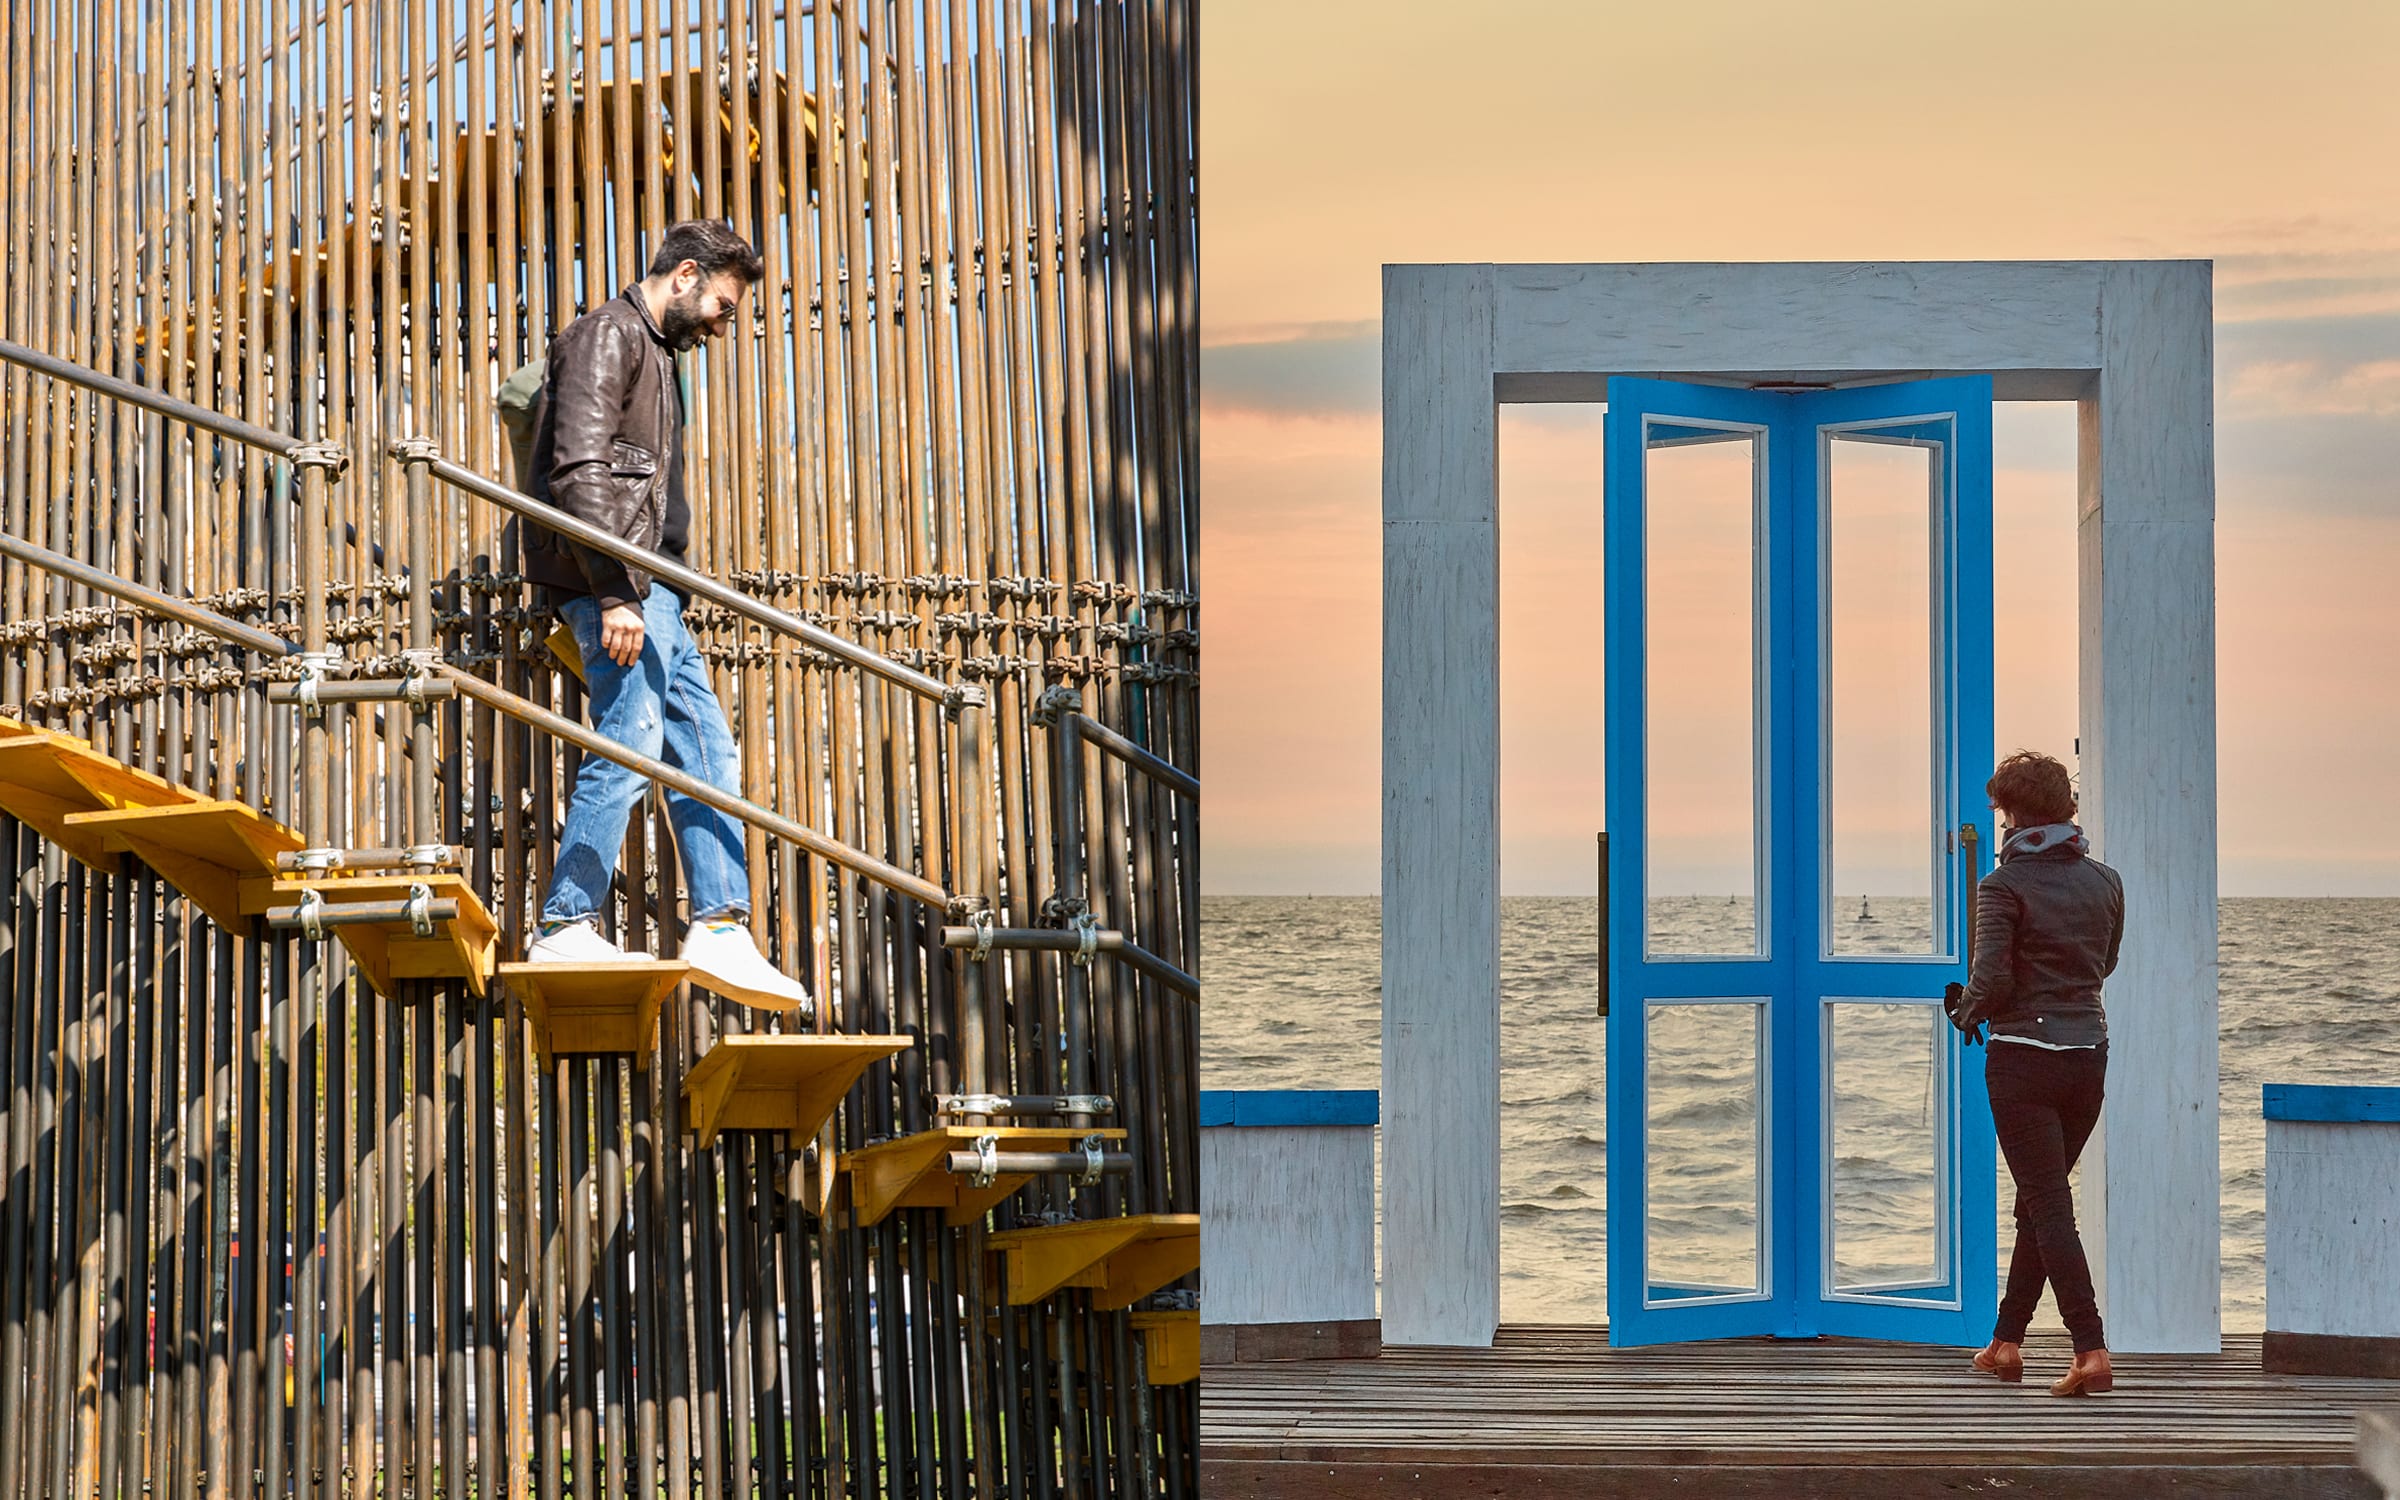 A visitor descends Luciana Lamothe's Starting Zone, 2018, installed in the Plaza República Oriental del Uruguay as part of 'Hopscotch (Rayuela)'; a quiet moment at the edge of an 800-meter fishing pier in front of Eduardo Basualdo's Perspective of Absence, 2018. Photos by Mani Gatto and Belen Caputo. © Art Basel